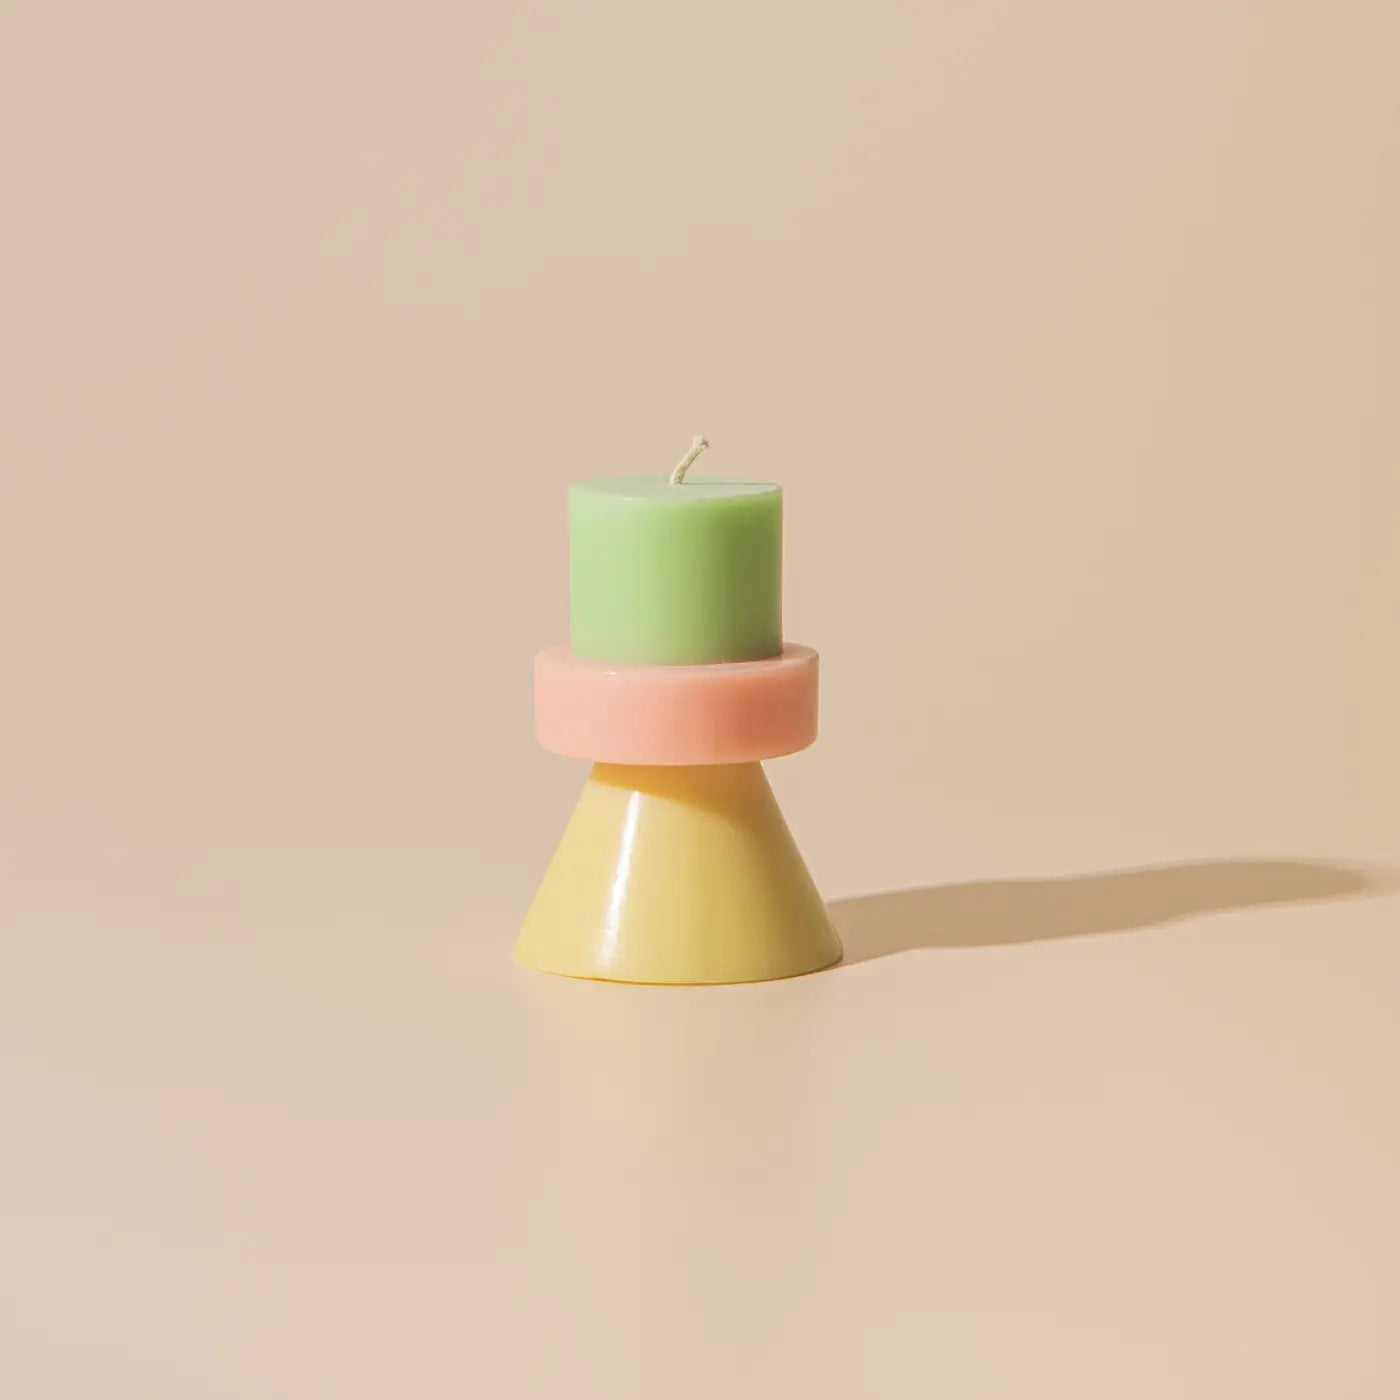 Stack Candle - lime green / coral / yellow